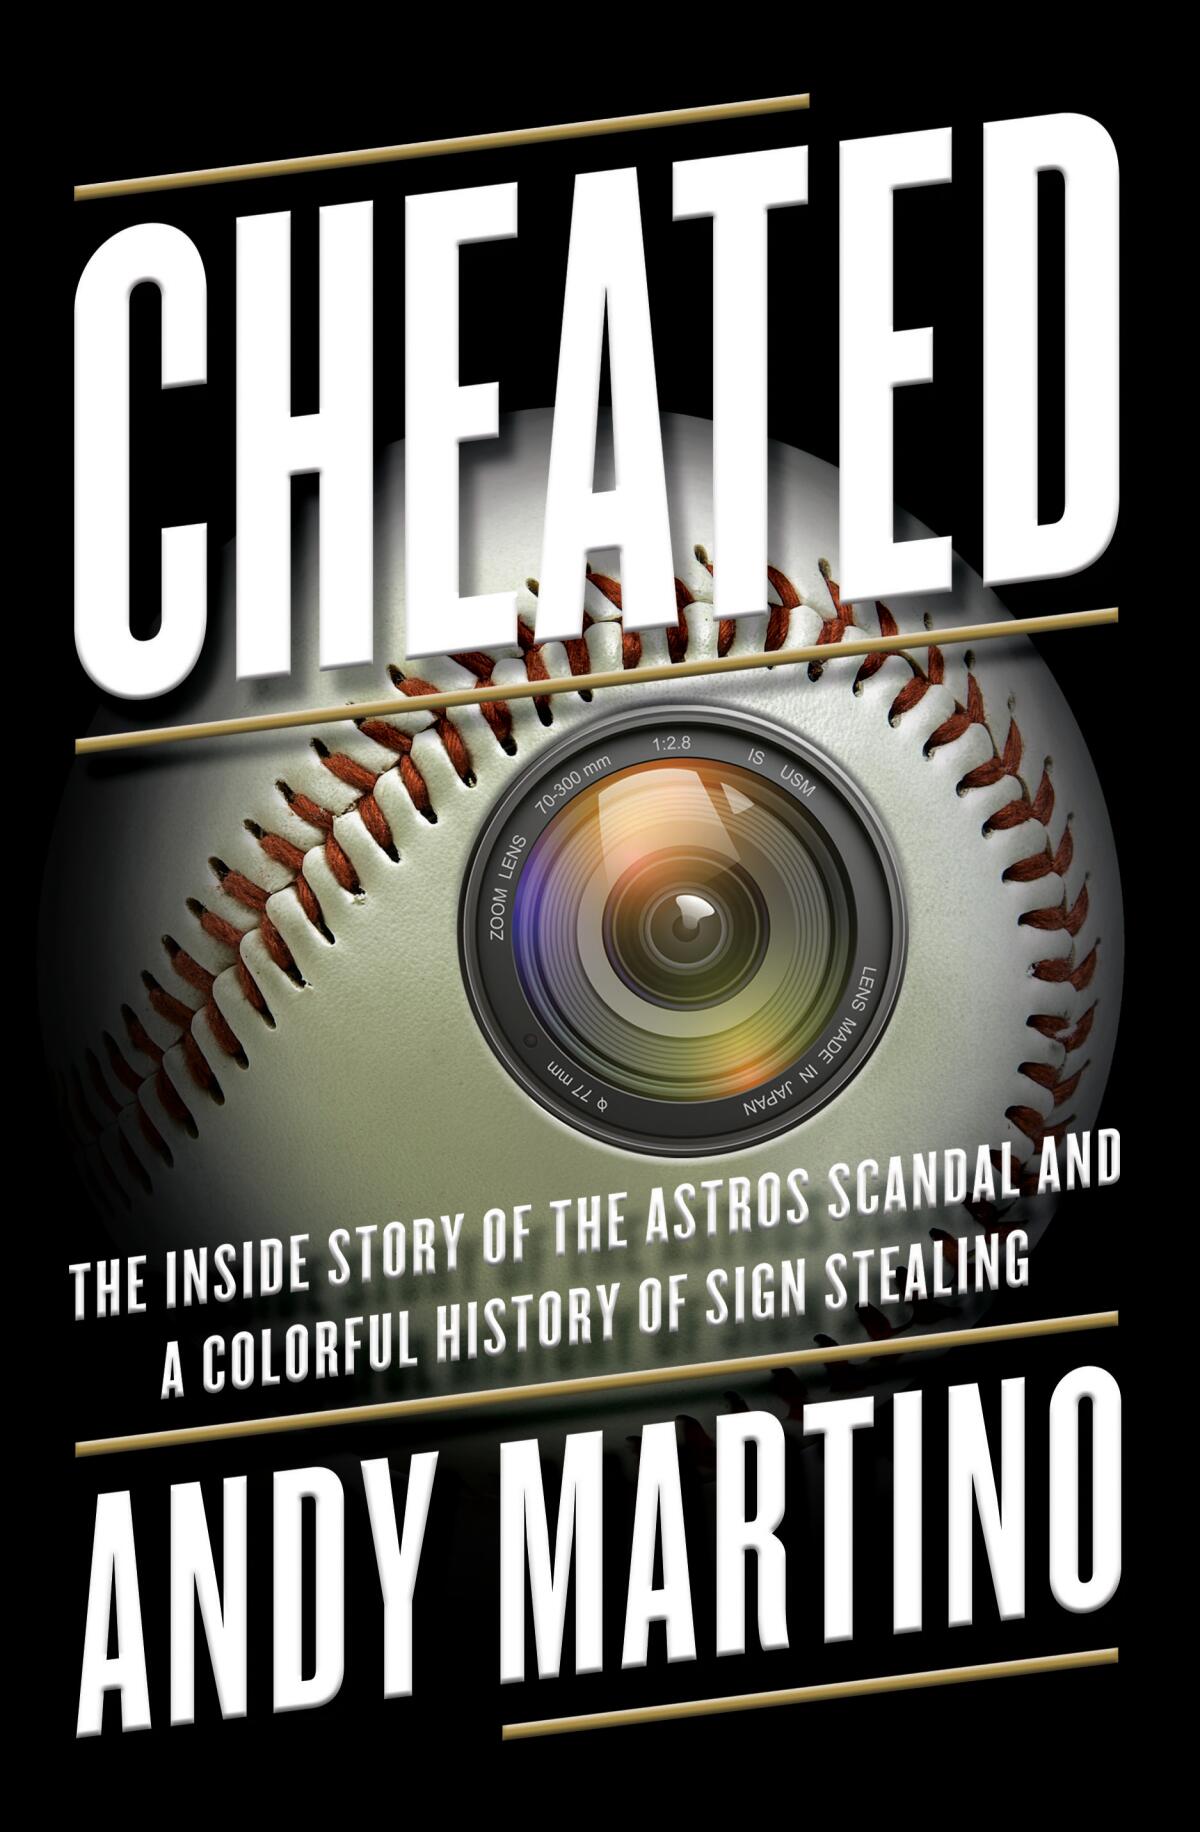 Cover of Andy Martino's book "Cheated".